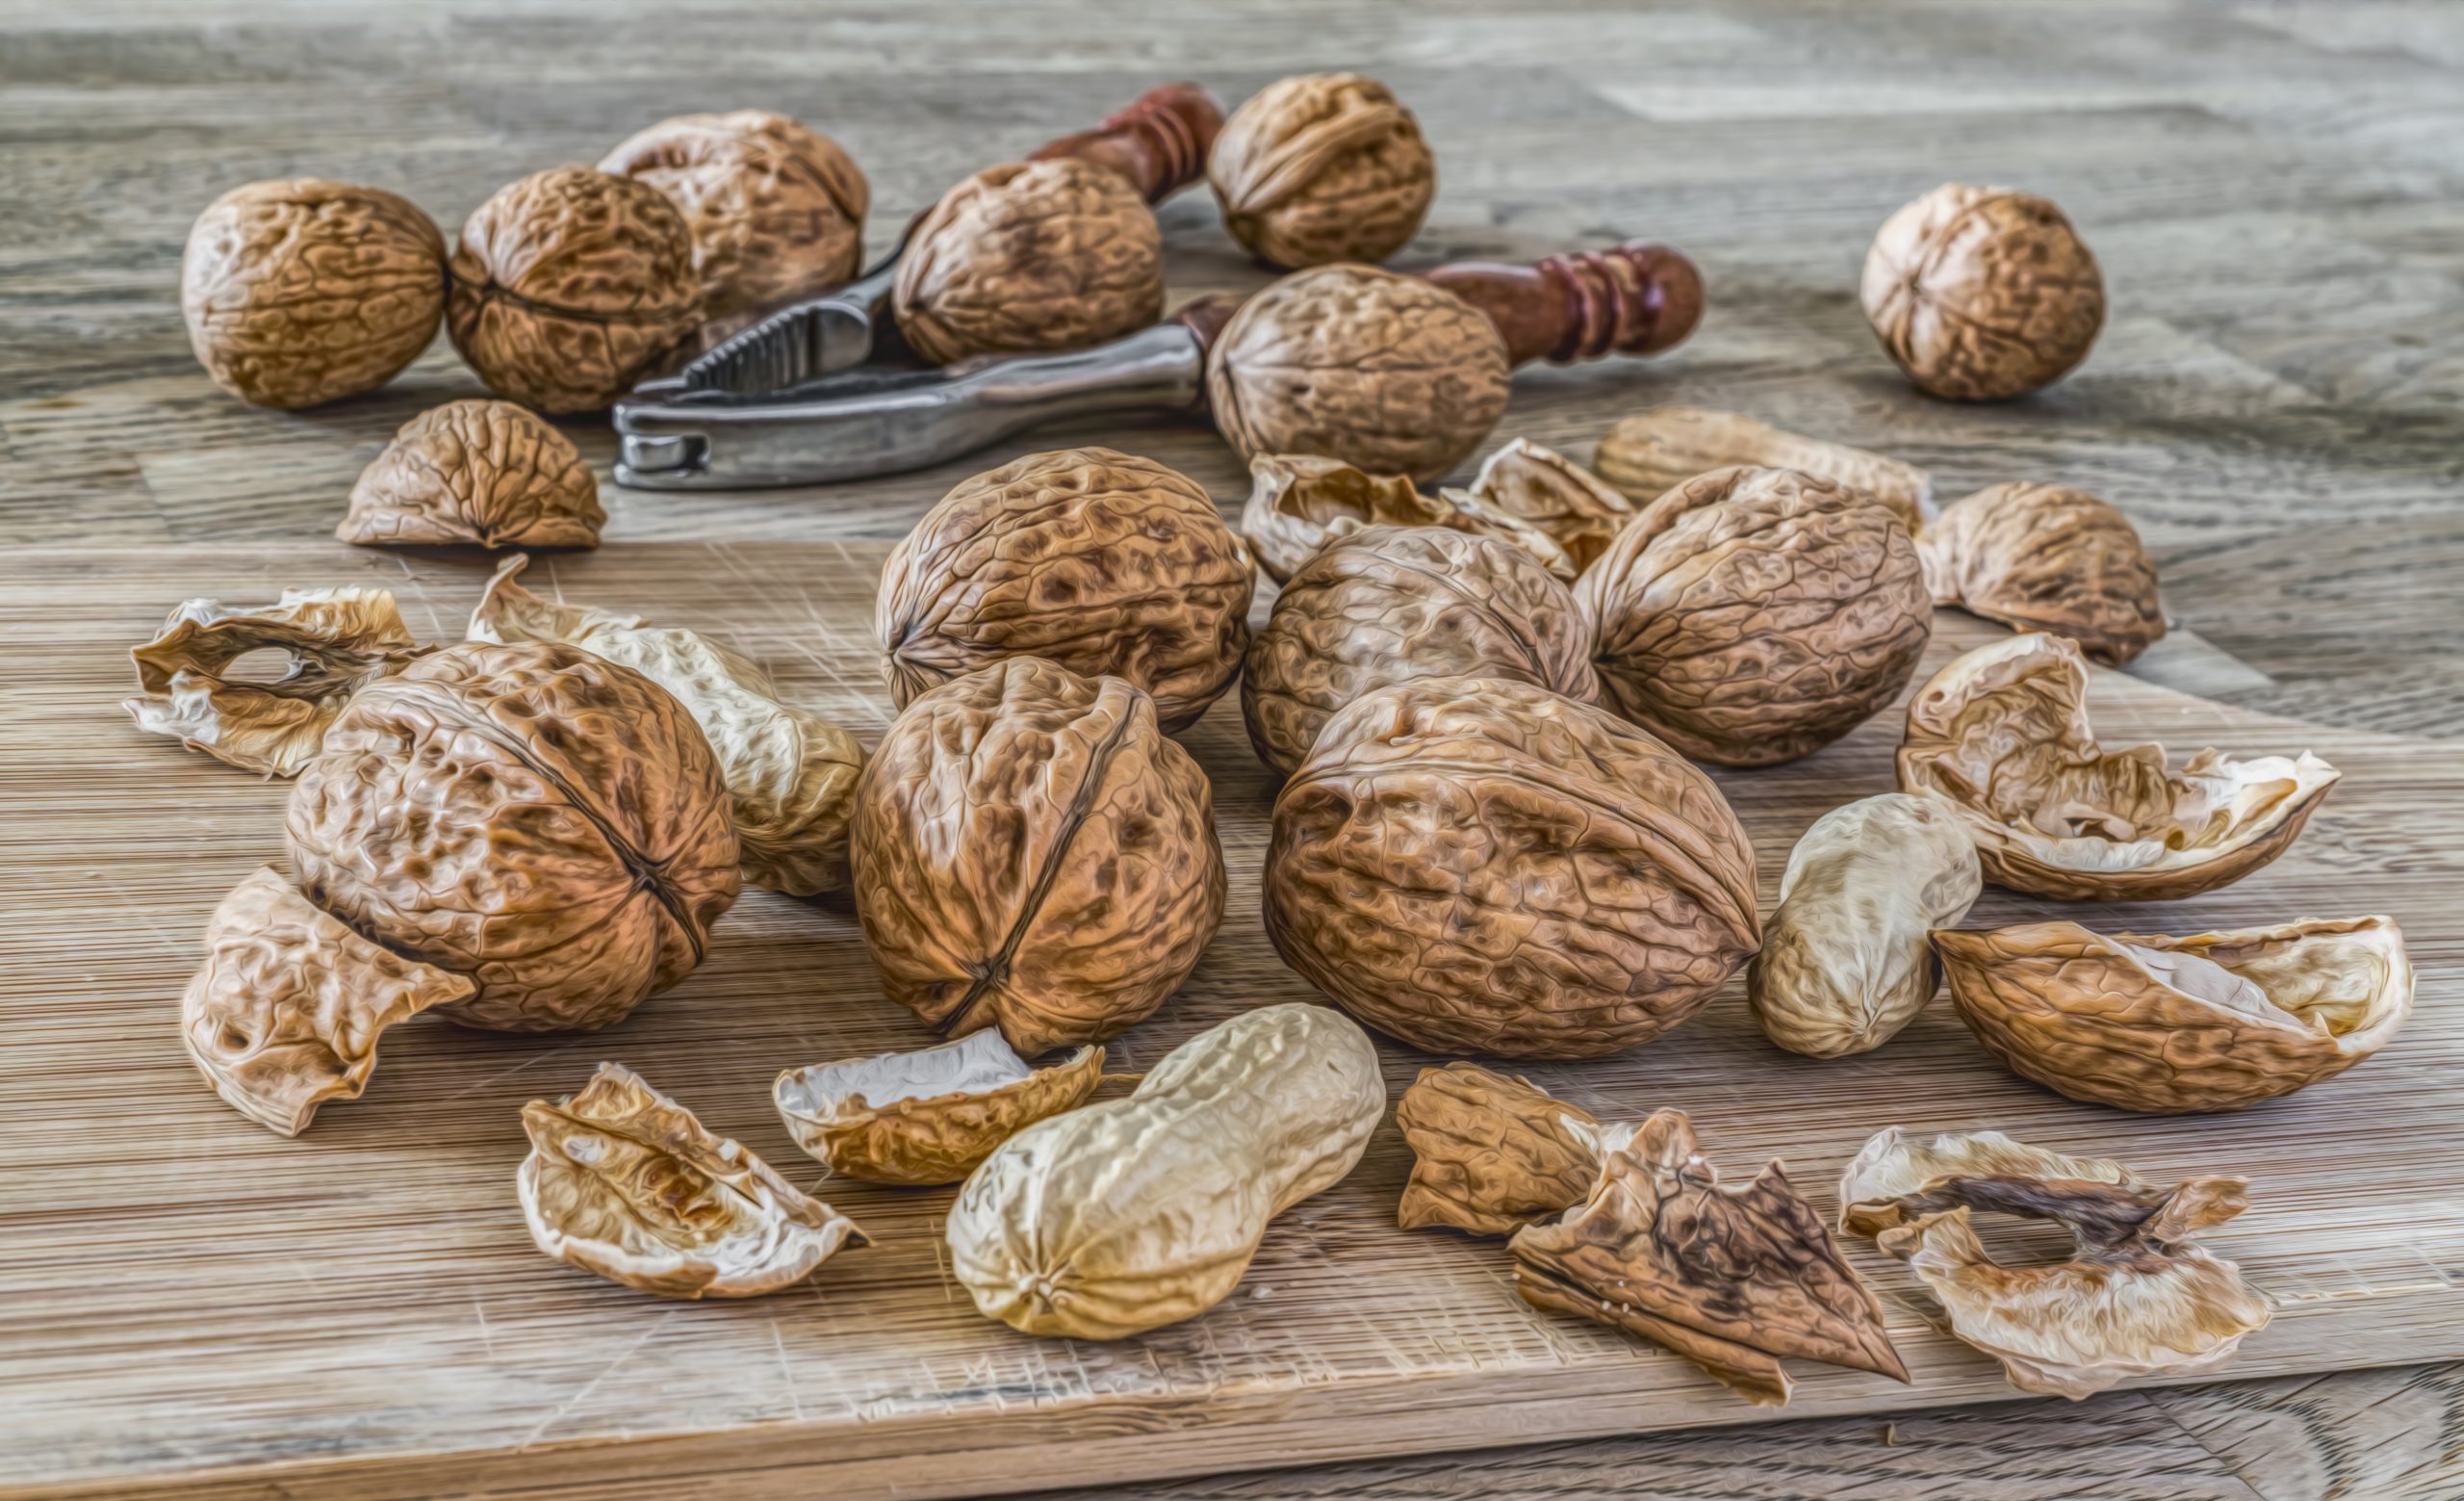 Walnuts are a great source of omega-3 fatty acids which support our mental health.